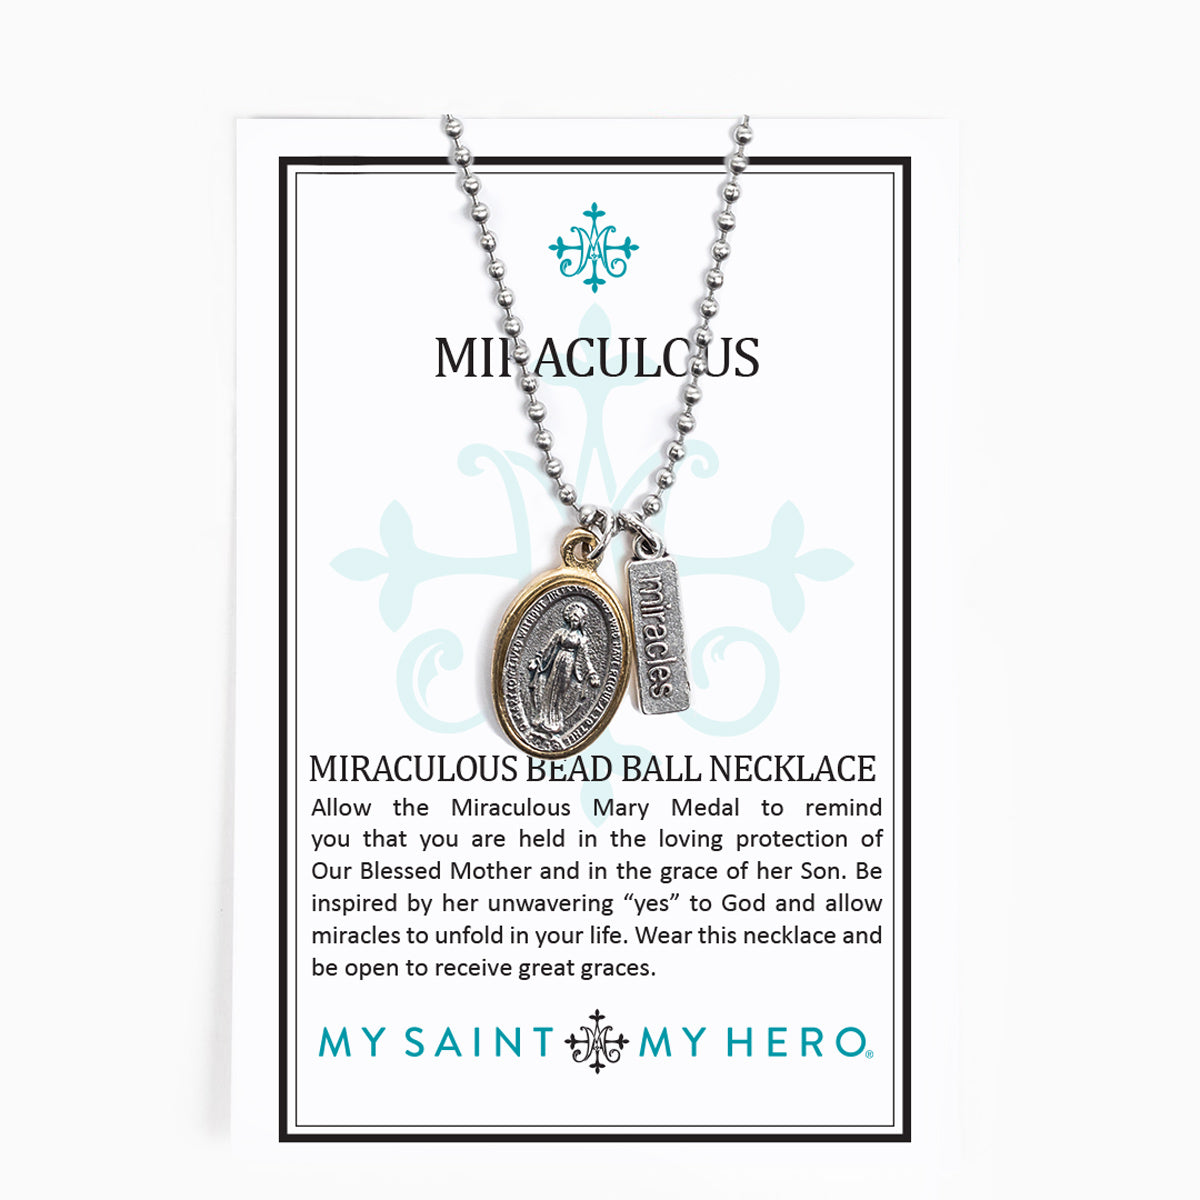 Miraculous Bead Ball Necklace by My Saint My Hero